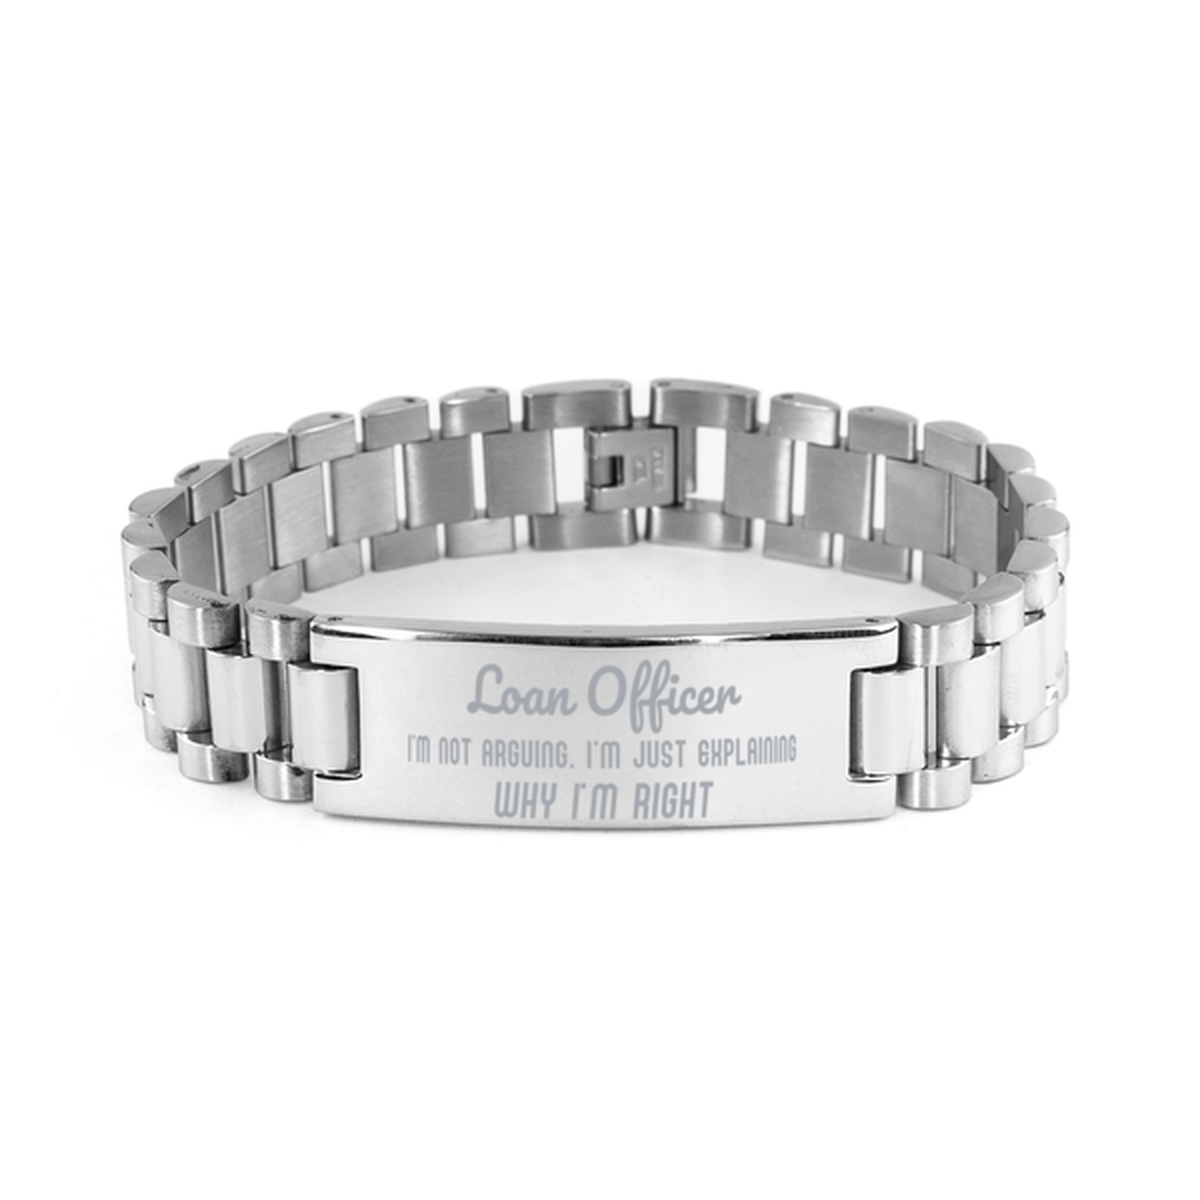 Loan Officer I'm not Arguing. I'm Just Explaining Why I'm RIGHT Ladder Stainless Steel Bracelet, Graduation Birthday Christmas Loan Officer Gifts For Loan Officer Funny Saying Quote Present for Men Women Coworker